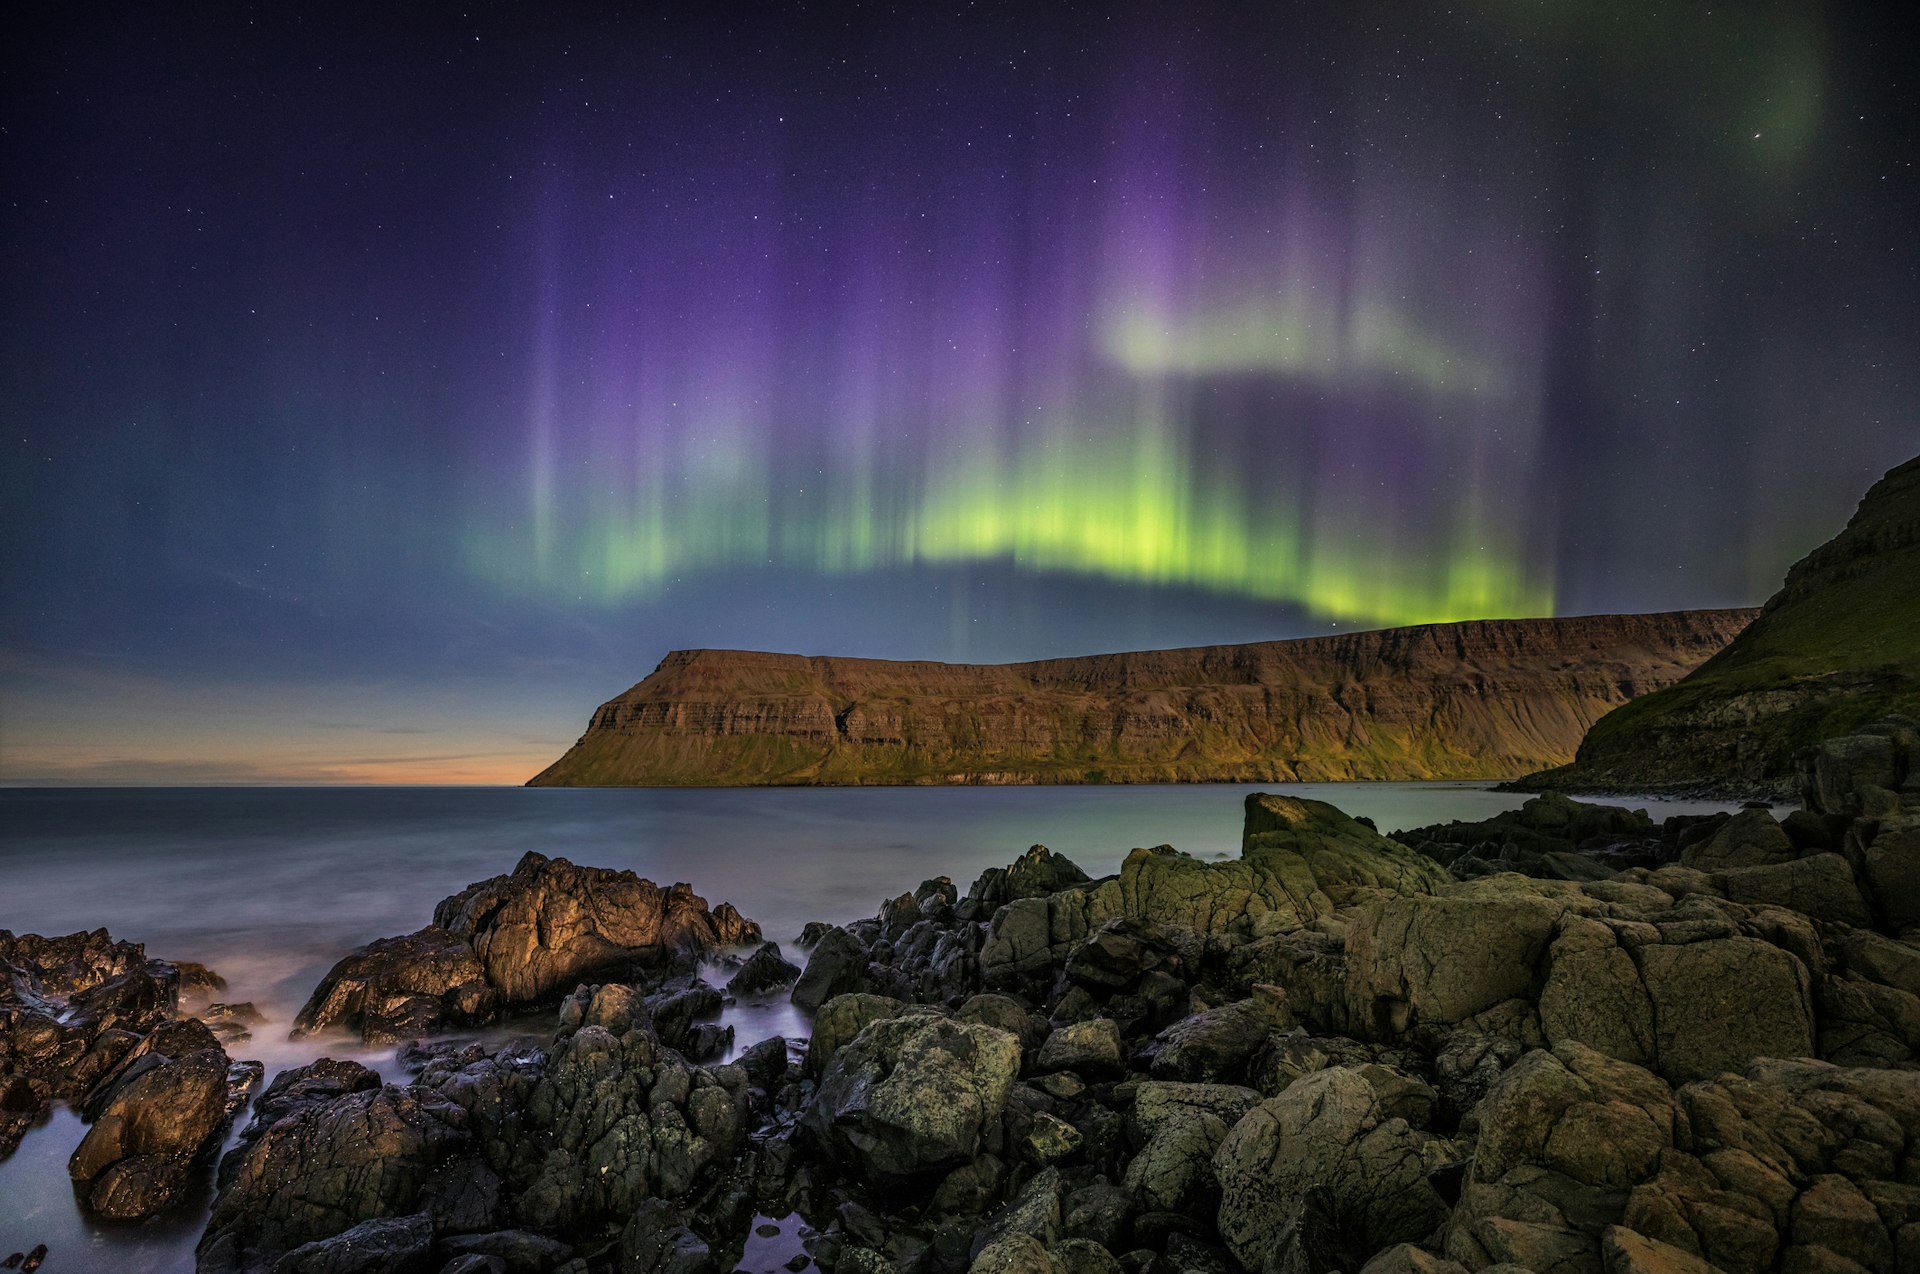 The night sky streaked with purple, green and yellow light as the Northern Lights sweep above a cliff top 